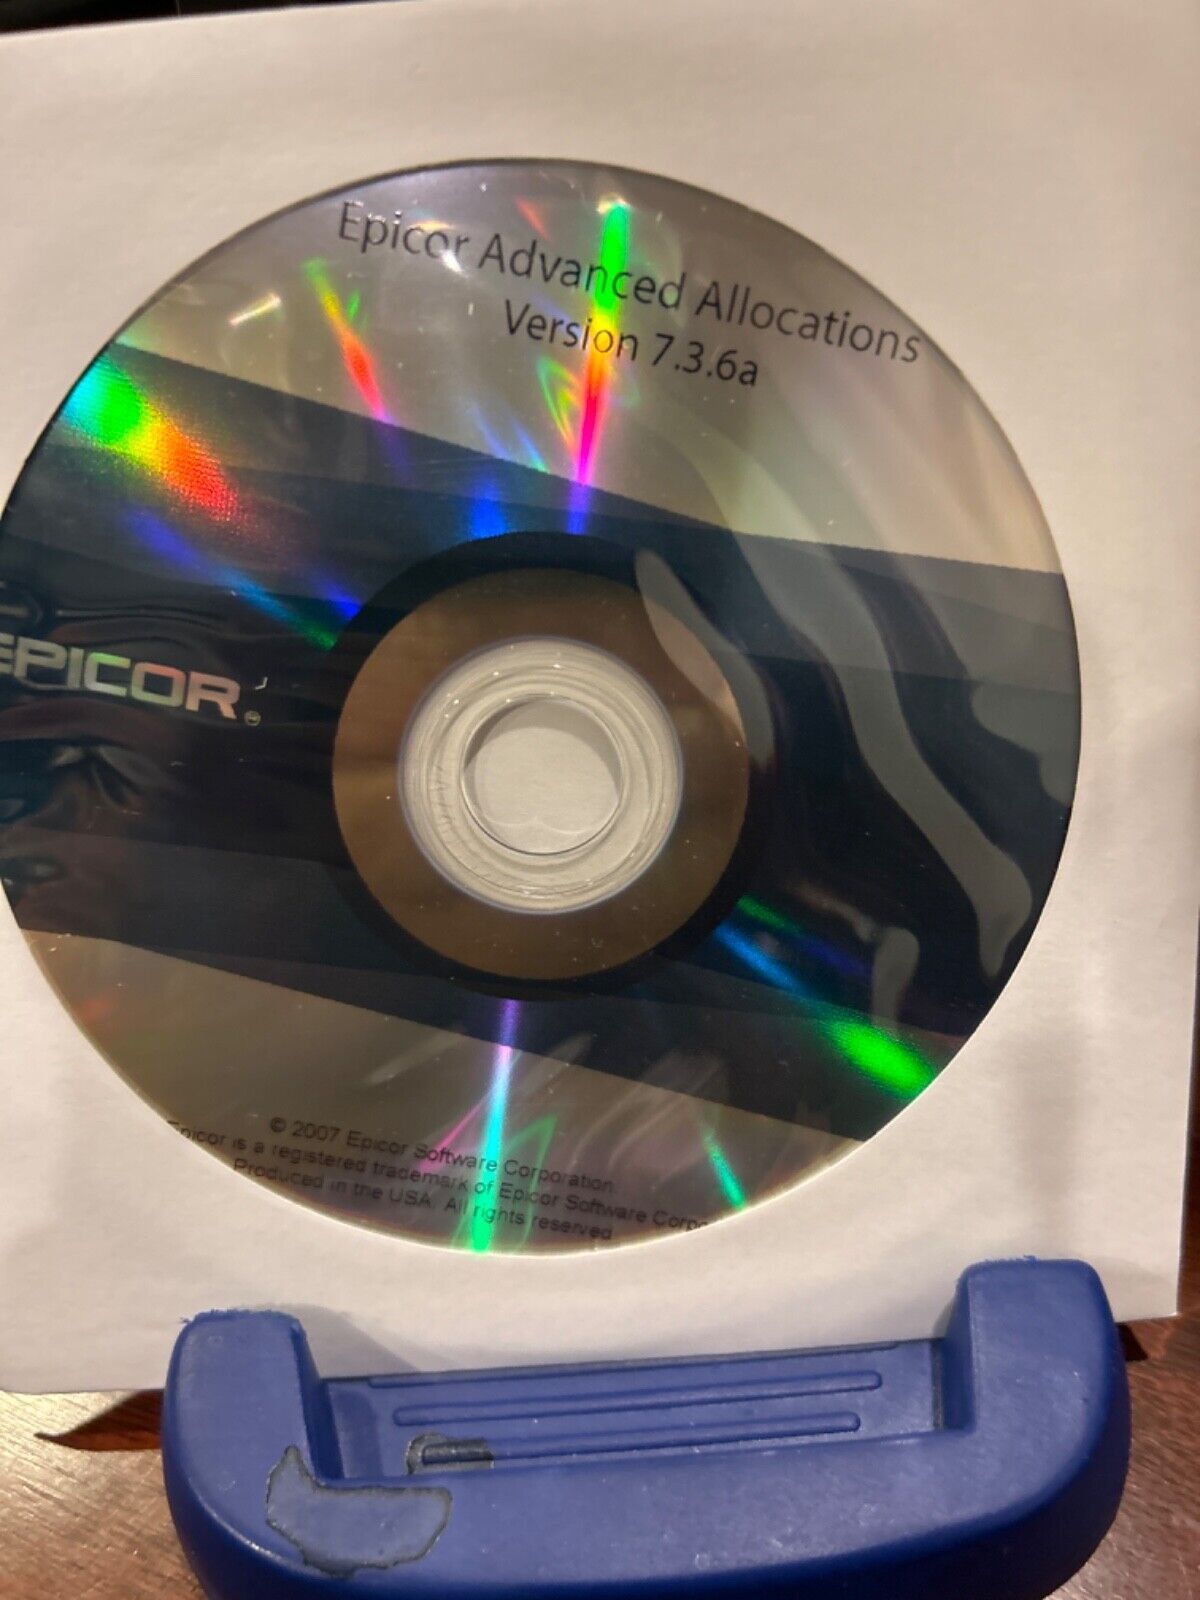 AWESOME BRAND NEW. Epicor Advanced Allocations Version 7.3.6a CD .Vintage.